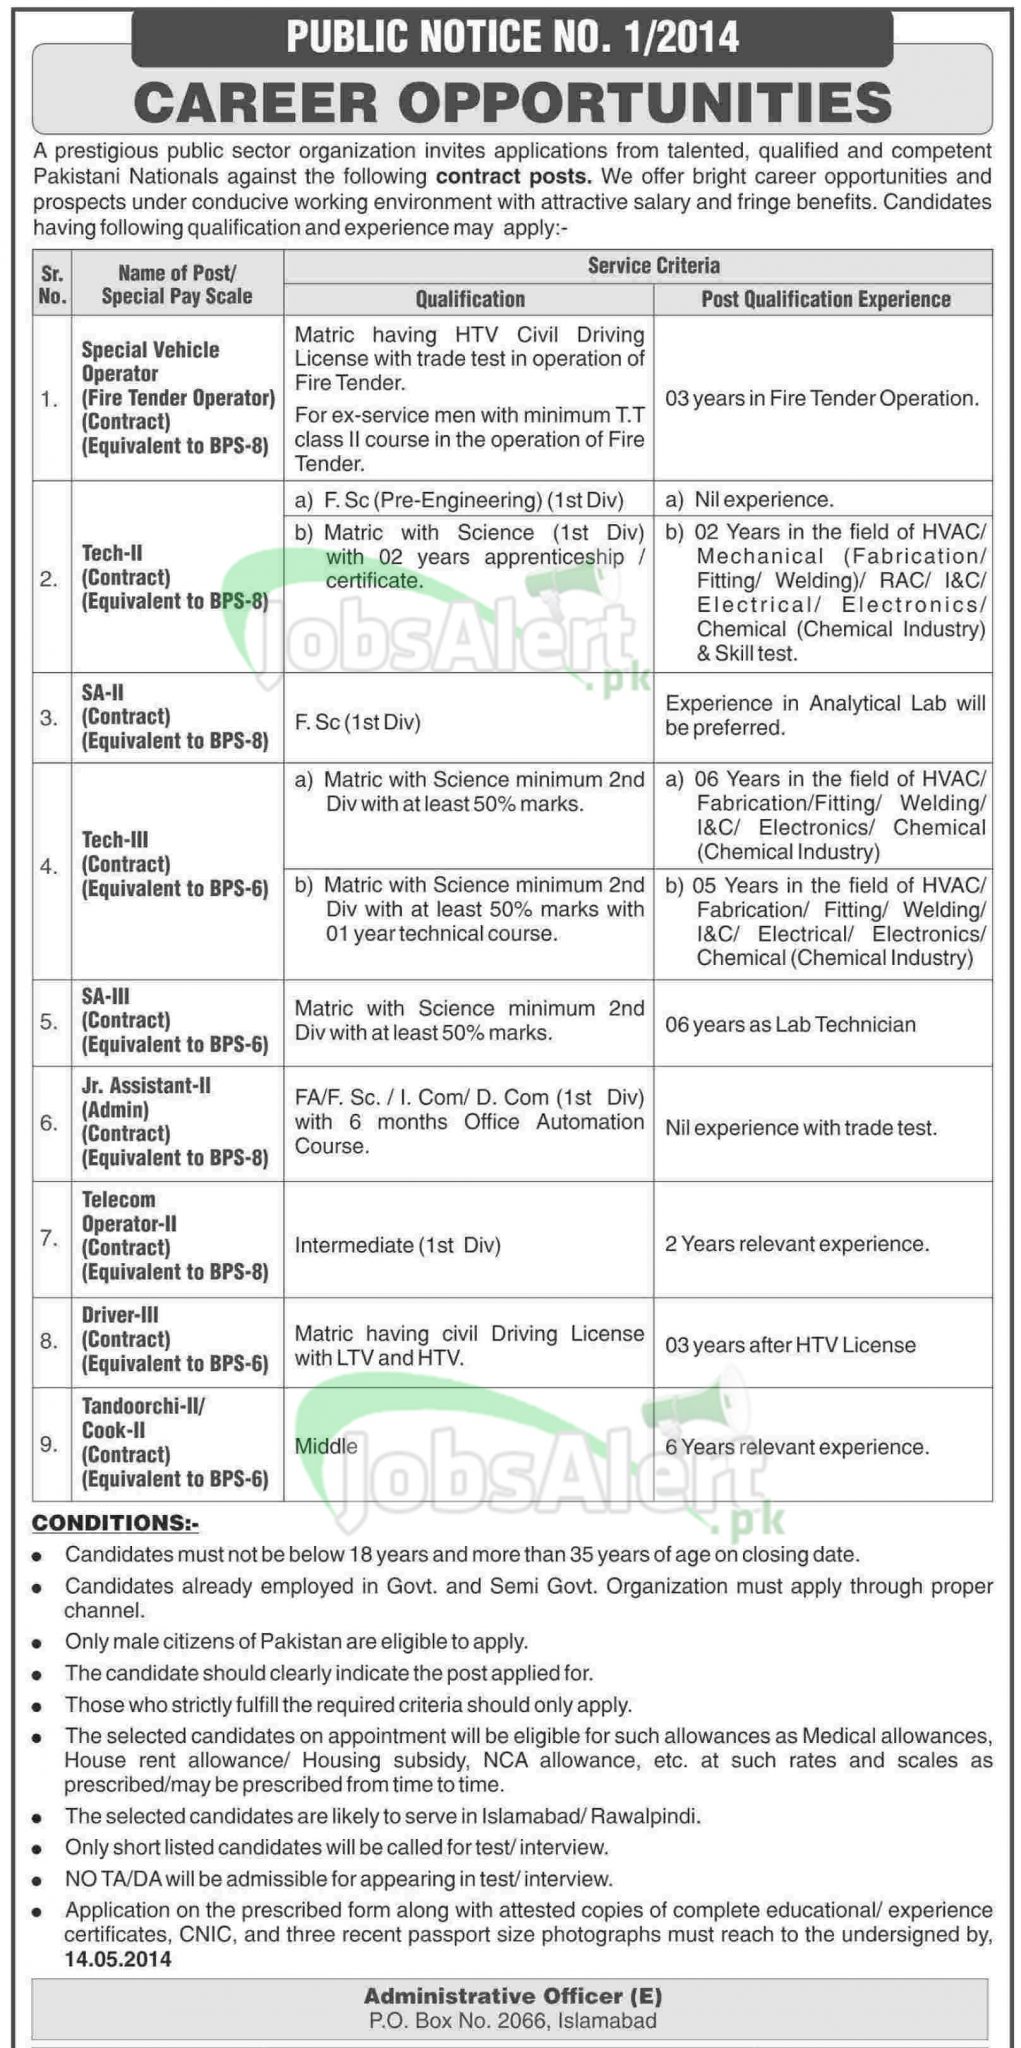 Public Sector Organization Jobs for Jr. Assistant 2014 Islamabad